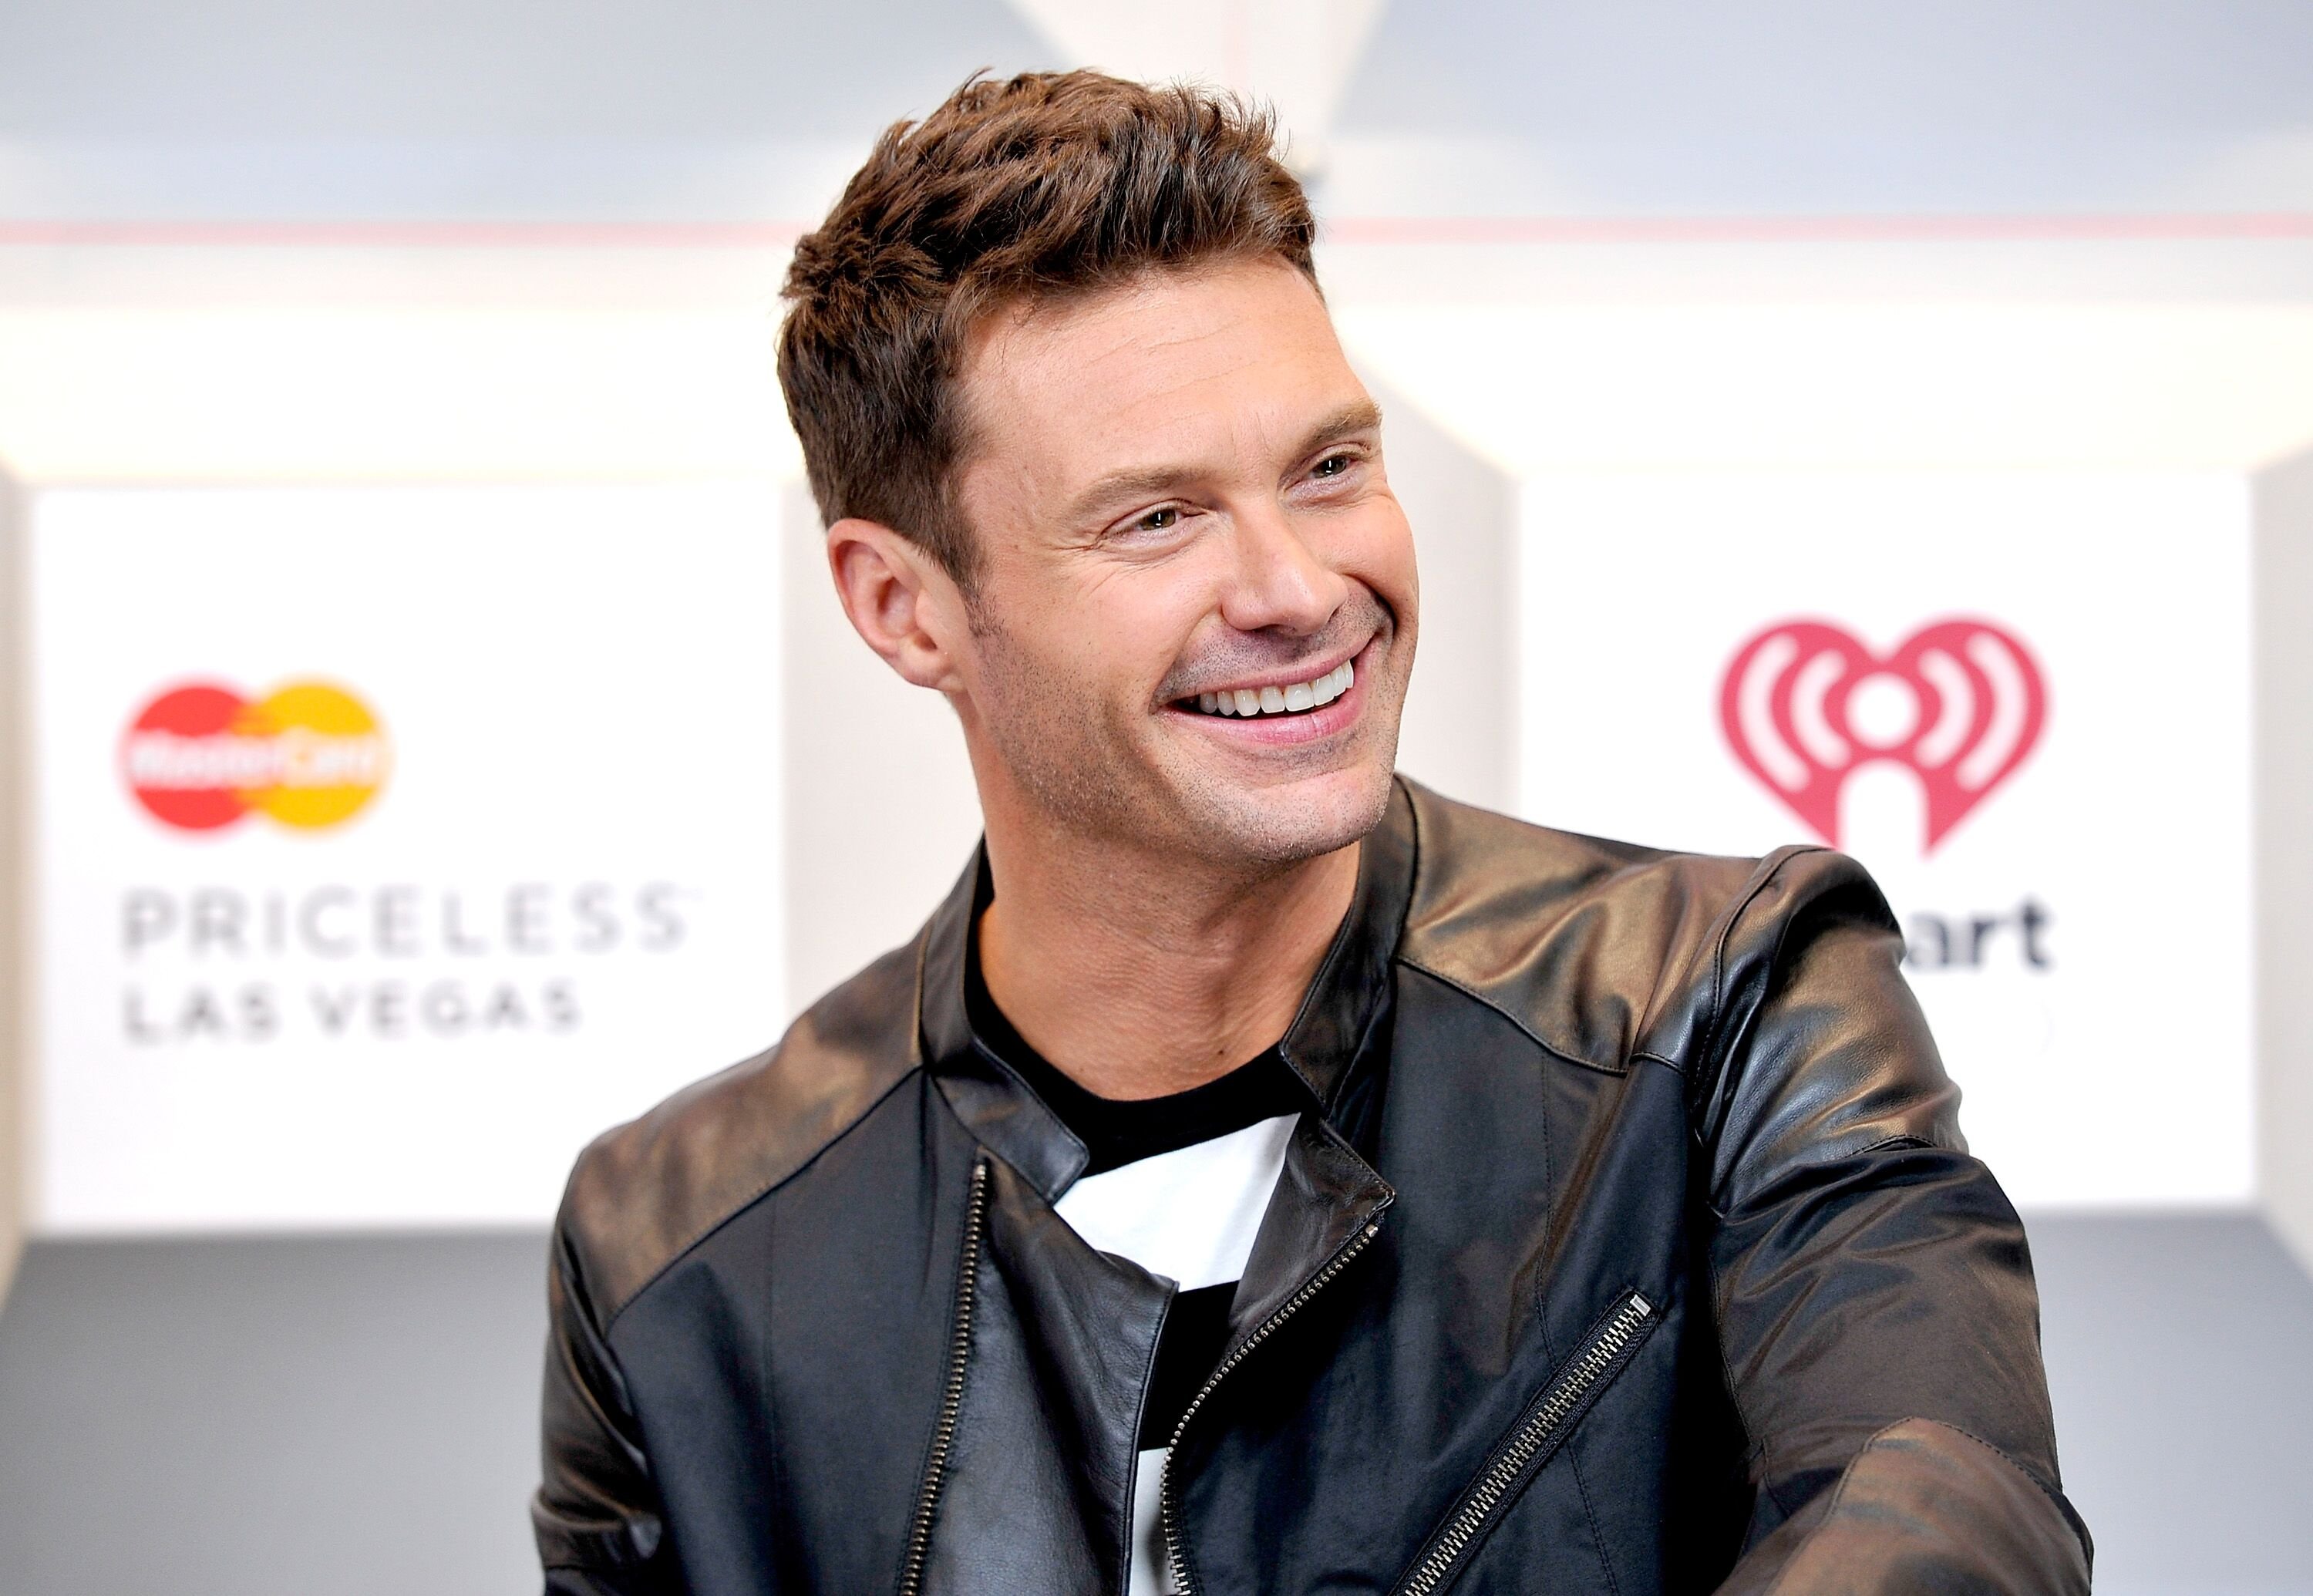 Host Ryan Seacrest attends the 2014 iHeartRadio Music Festival at the MGM Grand Garden Arena on September 19, 2014 | Photo: Getty Images